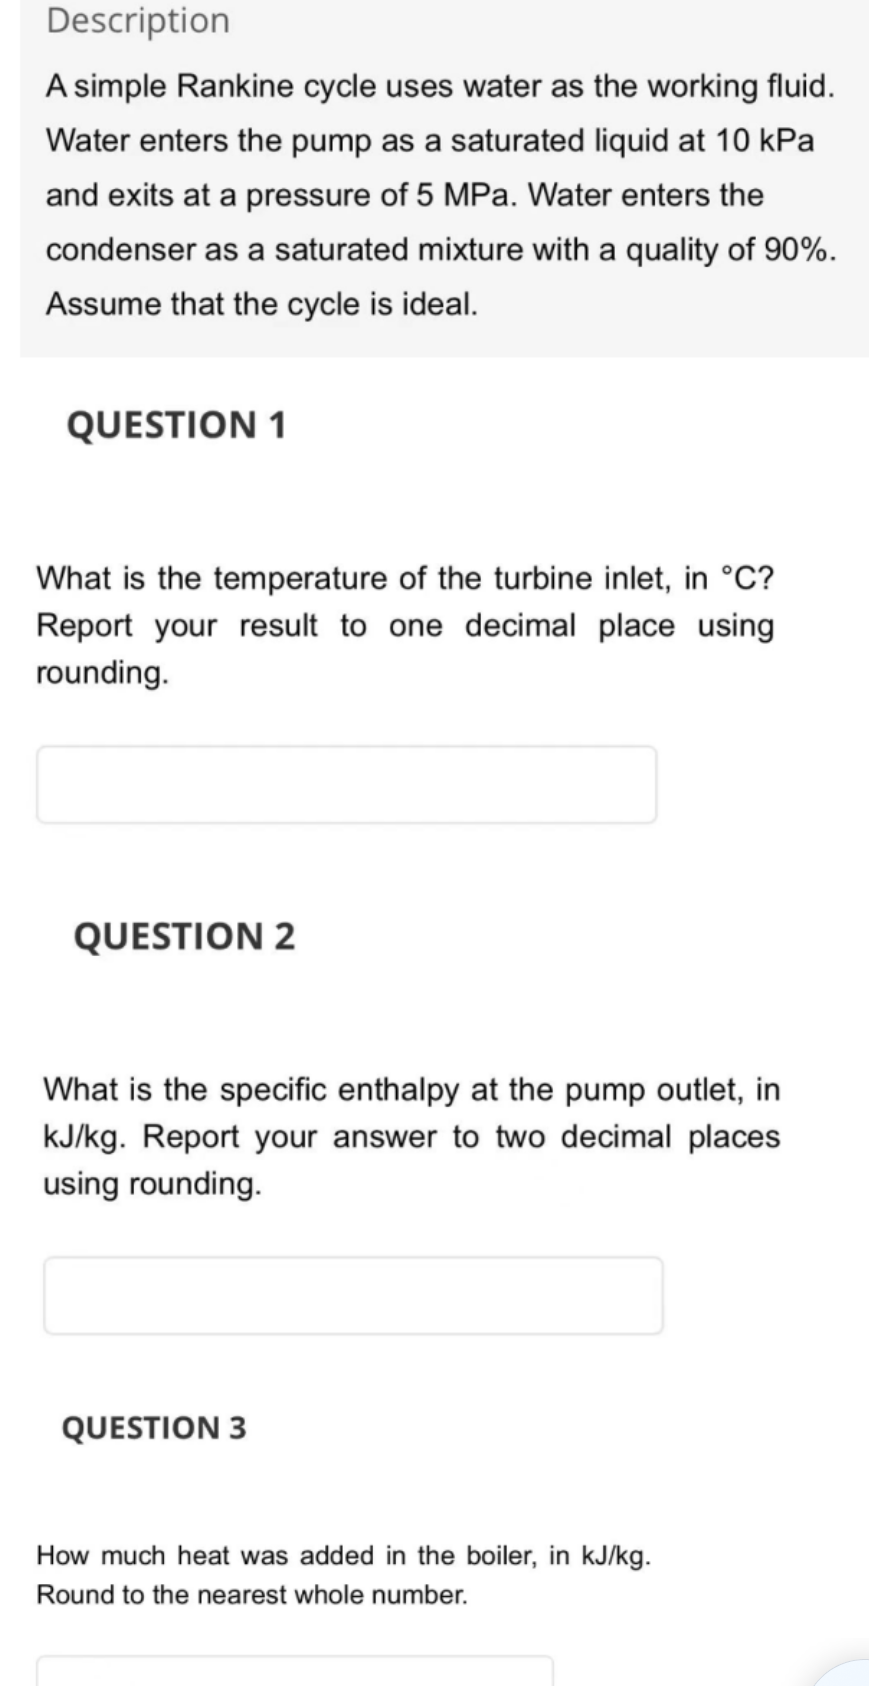 Description
A simple Rankine cycle uses water as the working fluid.
Water enters the pump as a saturated liquid at 10 kPa
and exits at a pressure of 5 MPa. Water enters the
condenser as a saturated mixture with a quality of 90%.
Assume that the cycle is ideal.
QUESTION 1
What is the temperature of the turbine inlet, in °C?
Report your result to one decimal place using
rounding.
QUESTION 2
What is the specific enthalpy at the pump outlet, in
kJ/kg. Report your answer to two decimal places
using rounding.
QUESTION 3
How much heat was added in the boiler, in kJ/kg.
Round to the nearest whole number.